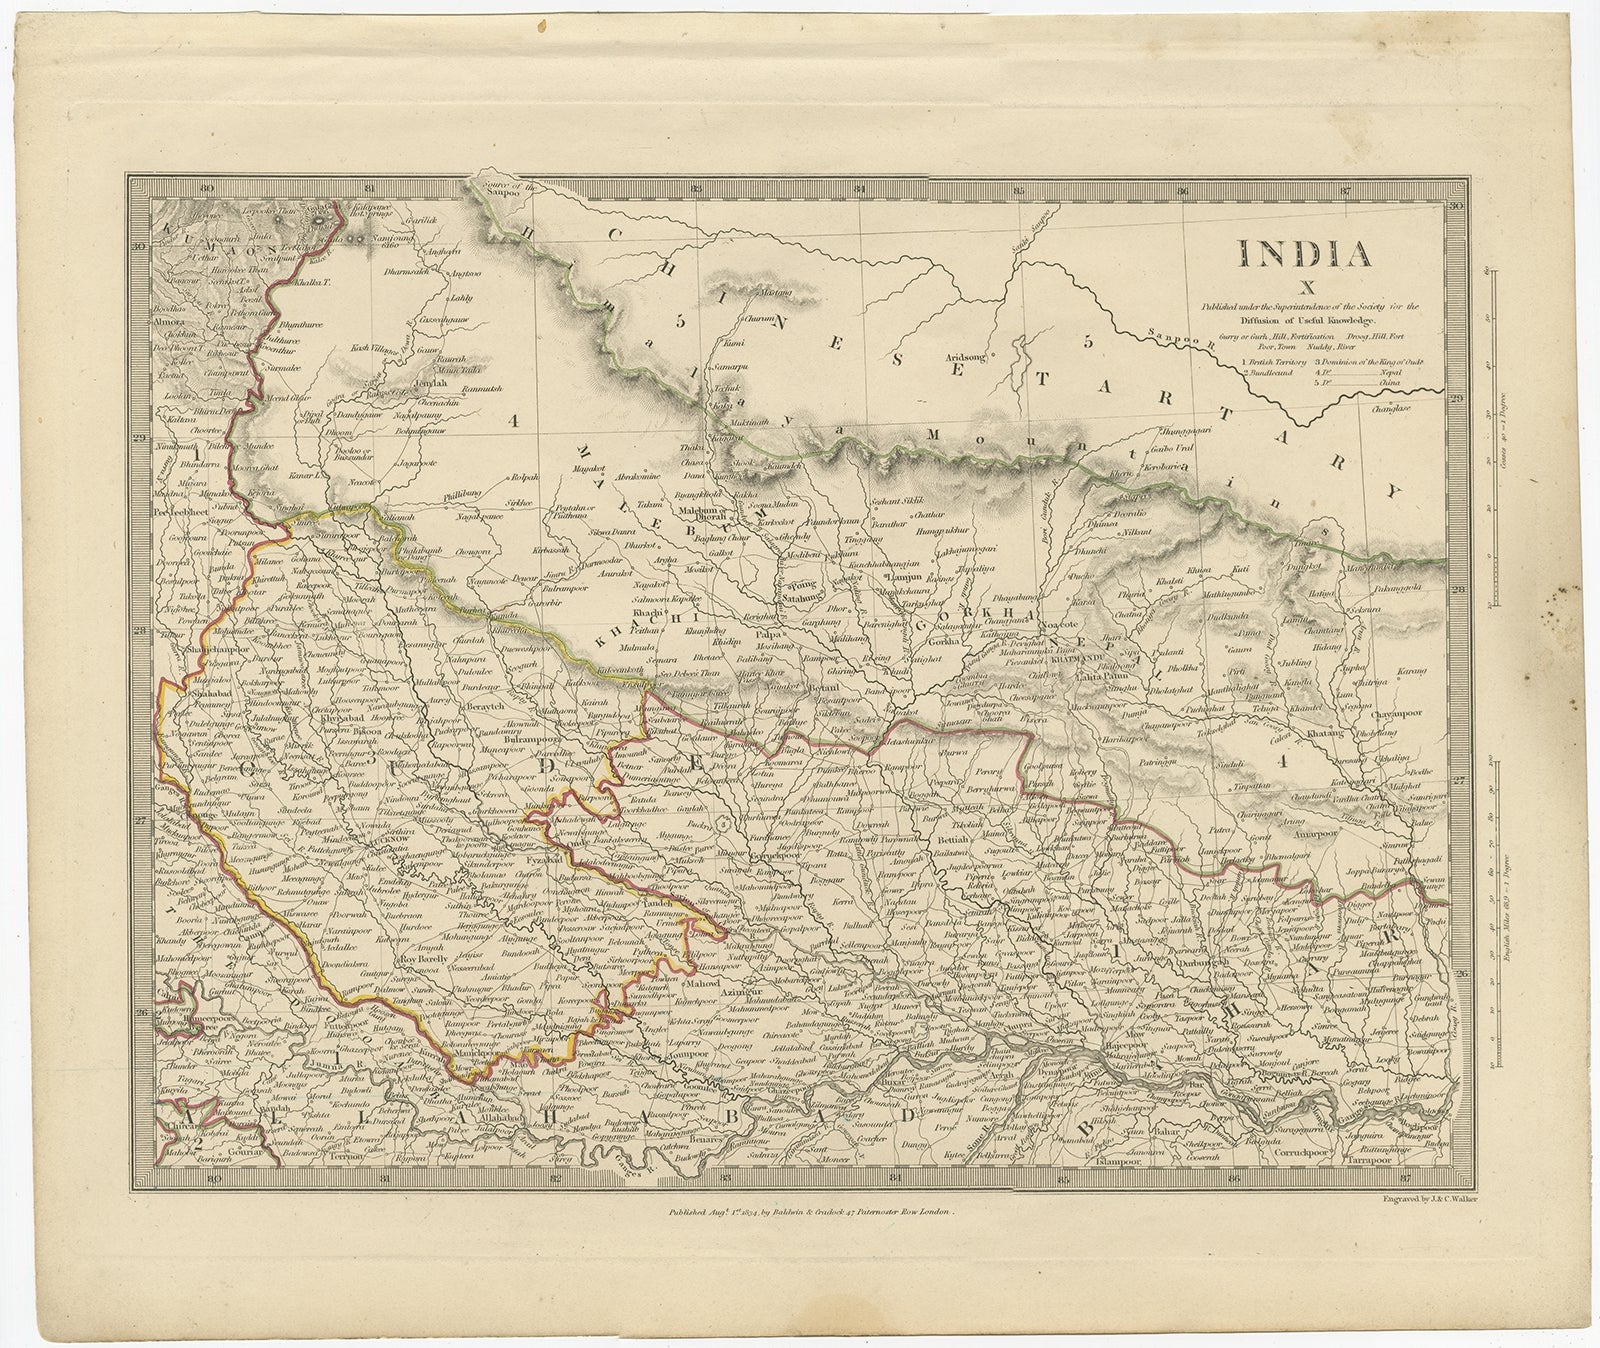 Antique map titled 'India X'. Old steel engraved map of part of the Bahar region, it also shows part of Nepal. 

Artists and Engravers: Engraved by J. & C. Walker. Published under the superintendence of the Society for the Diffusion of Useful